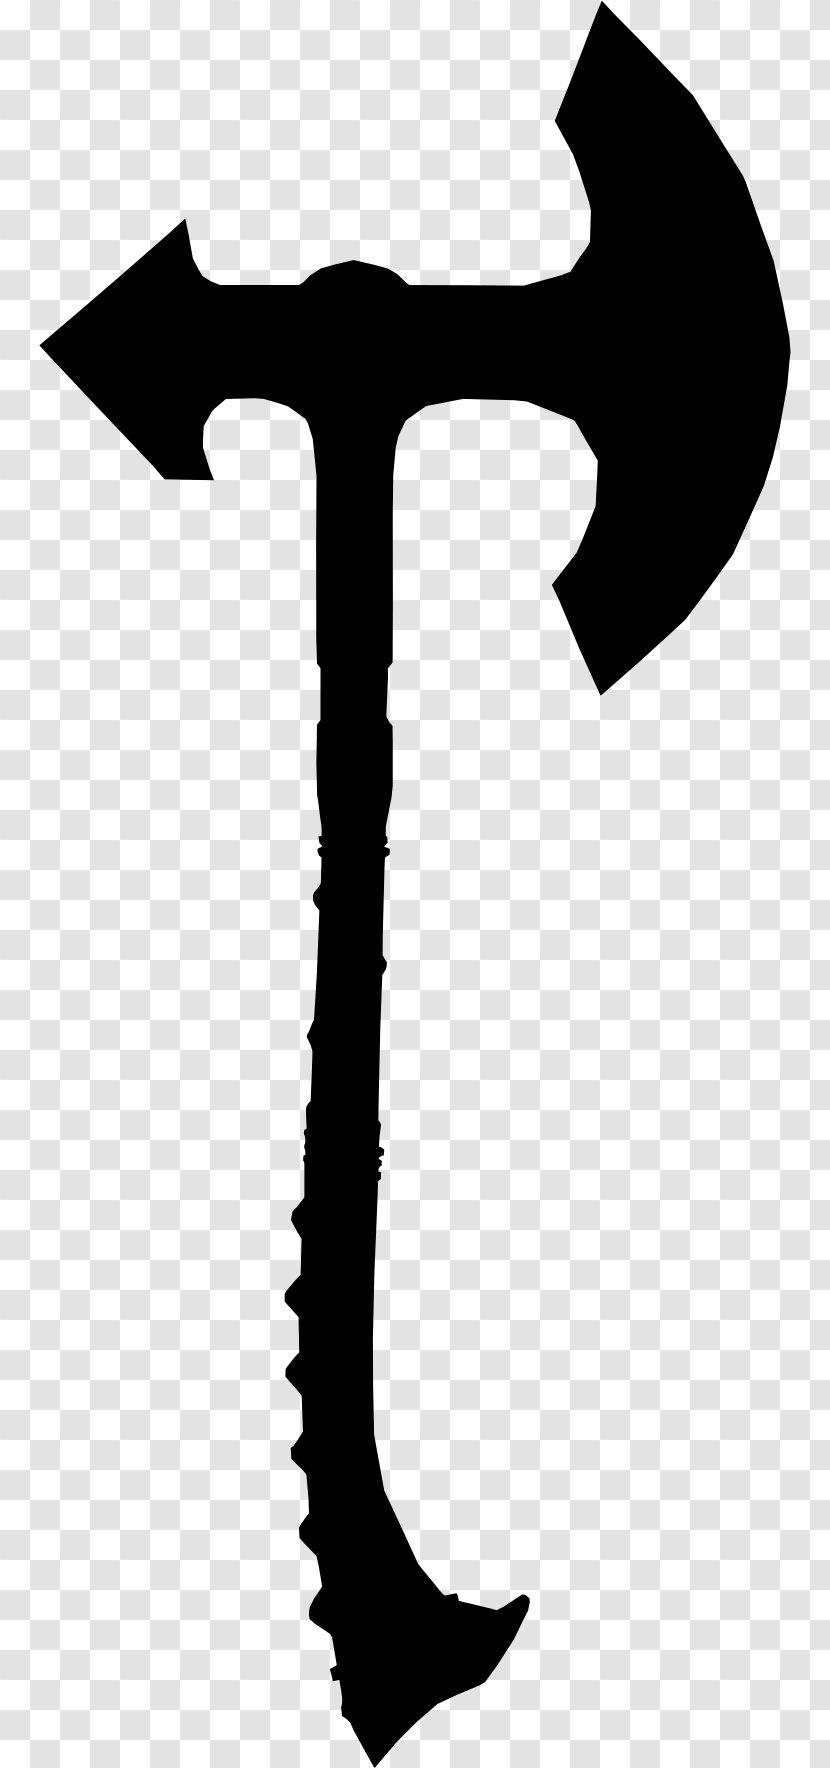 Throwing Axe Weapon Clip Art Transparent PNG